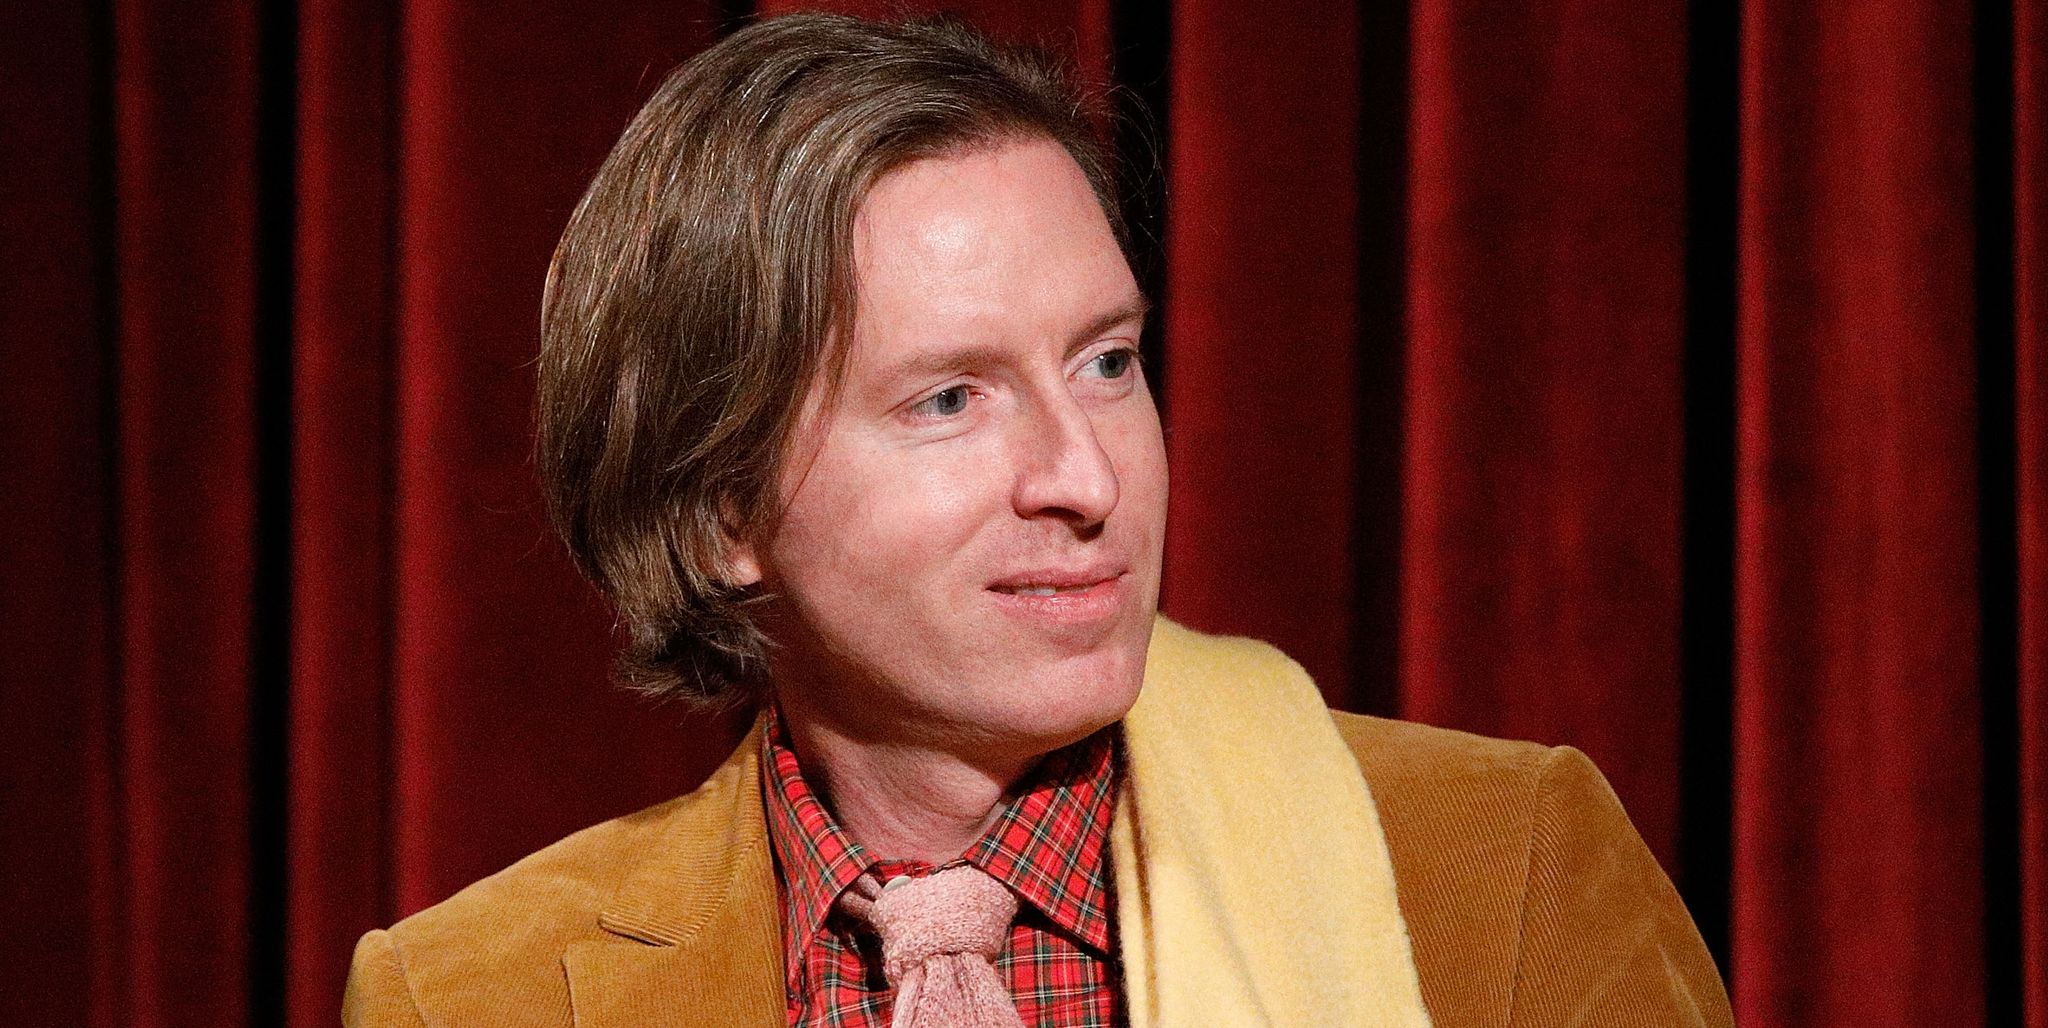 Wes Anderson favourite films